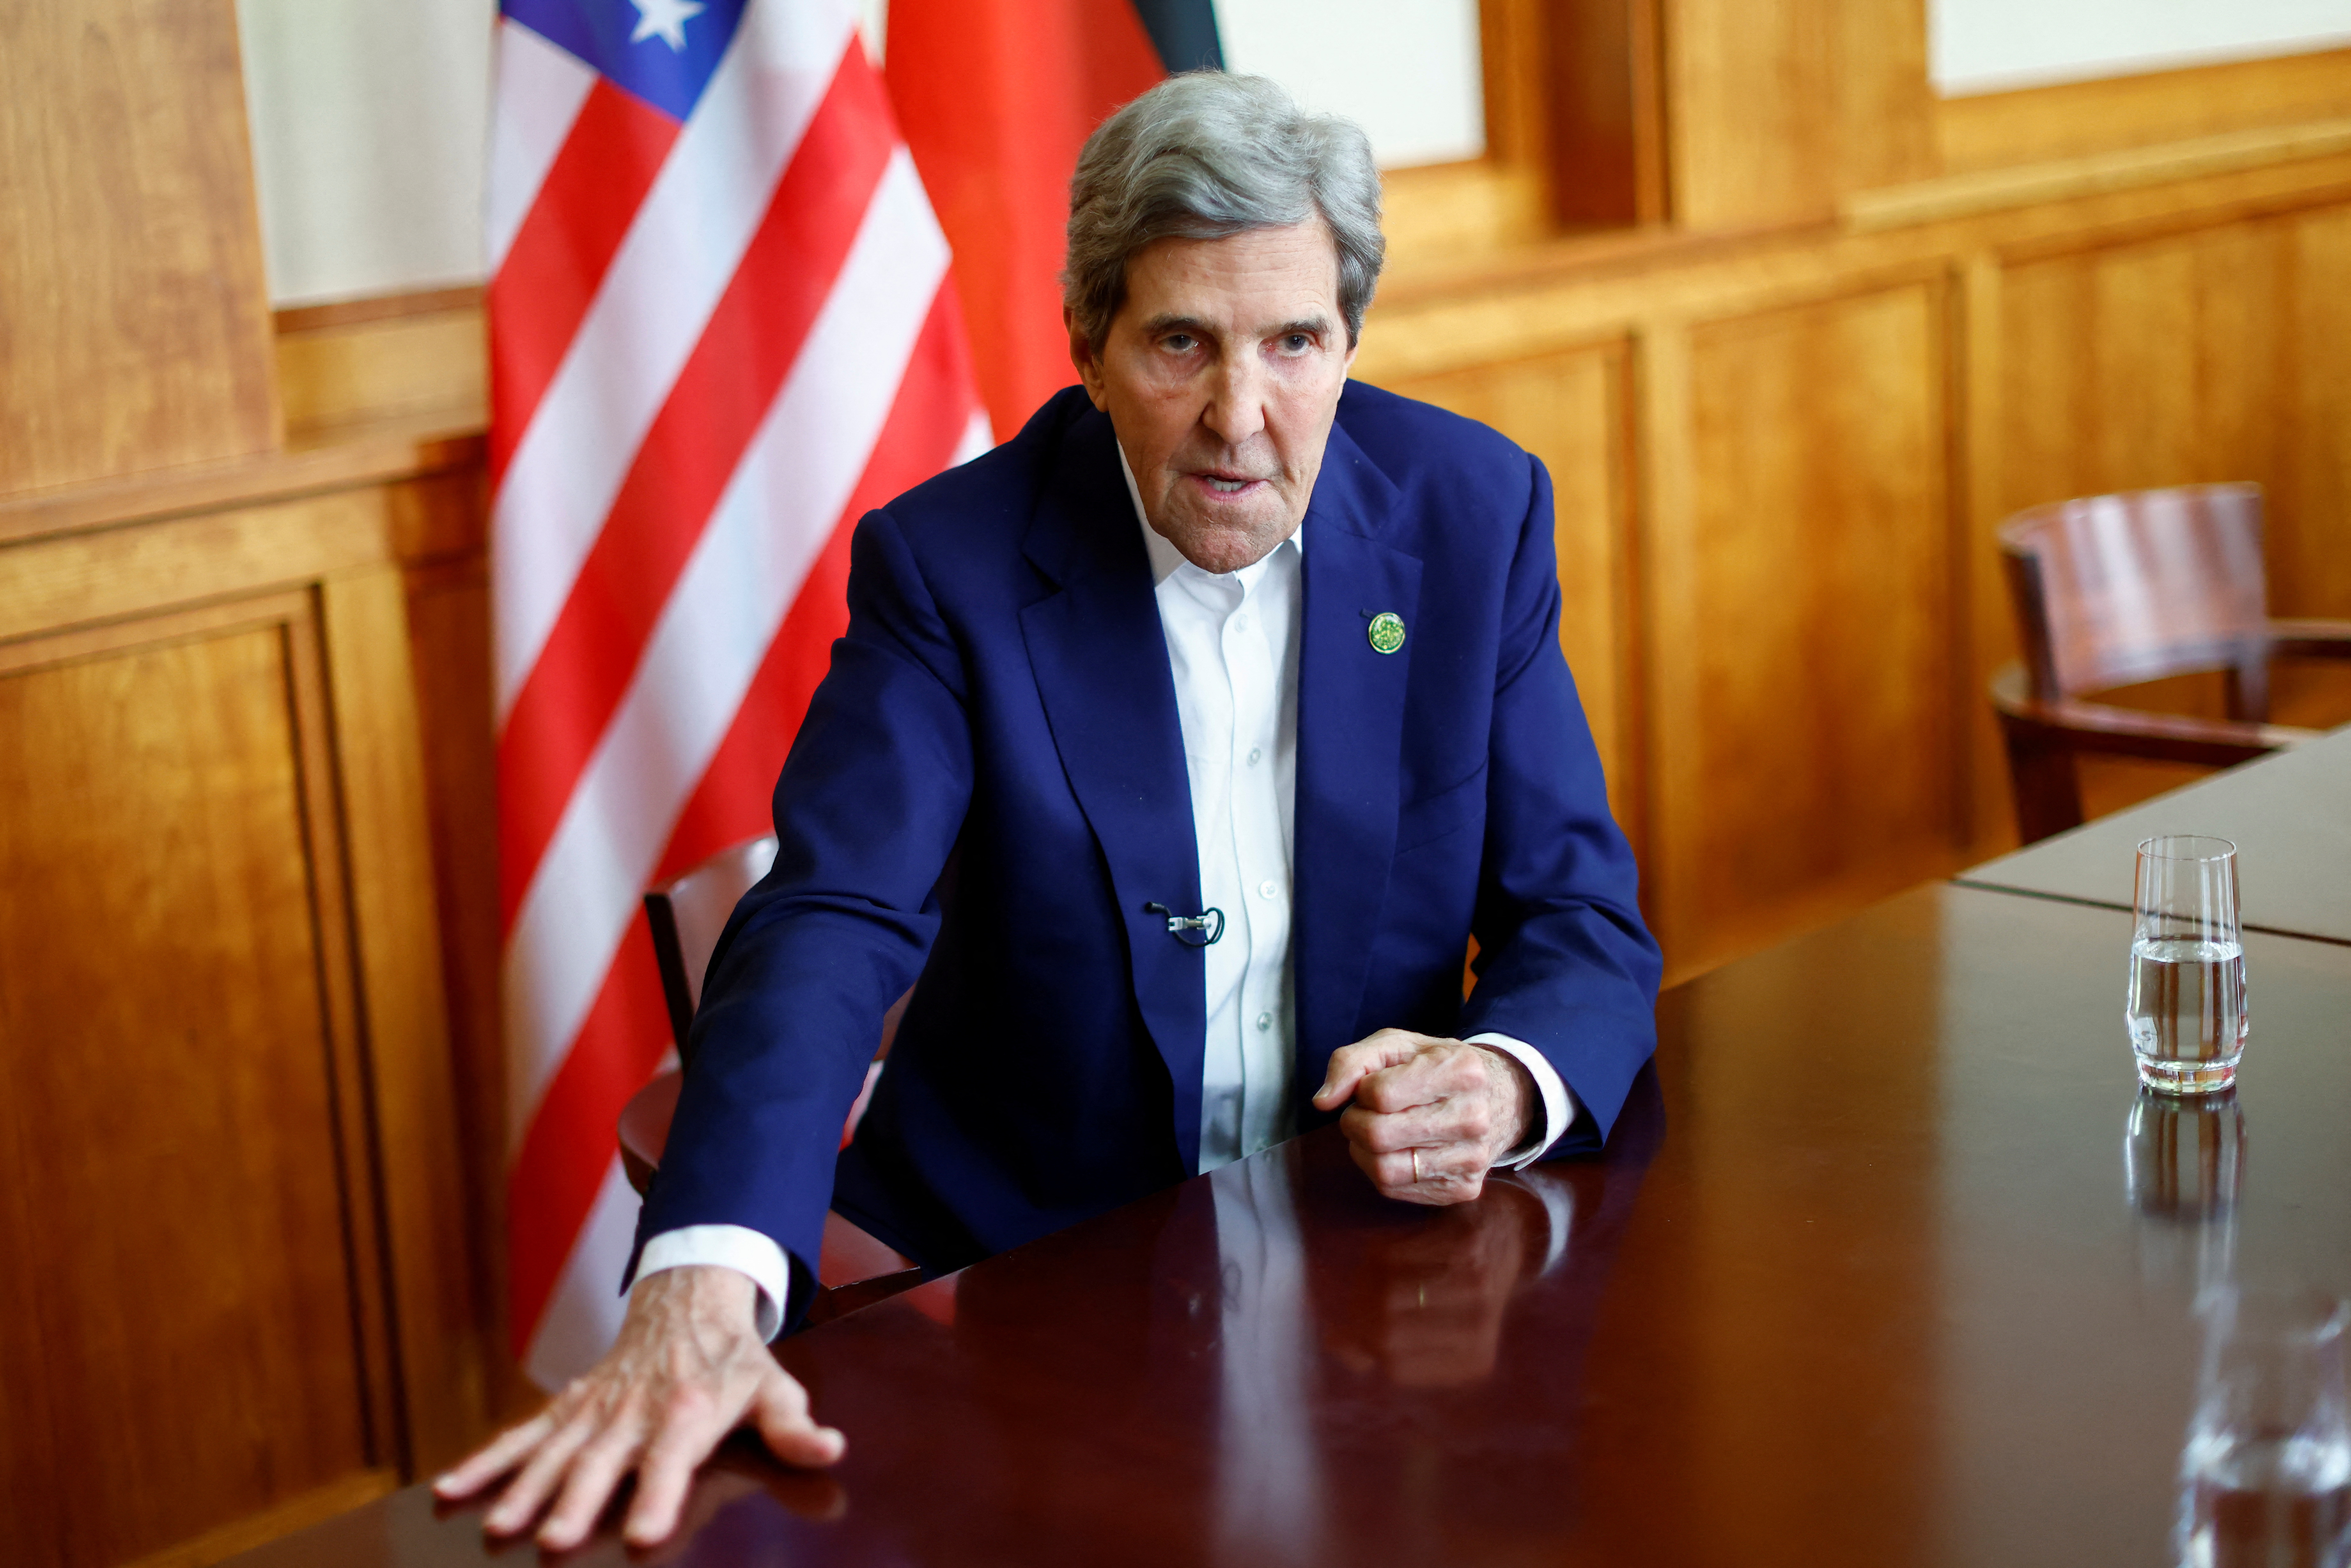 U.S. Special Presidential Envoy for Climate Kerry speaks during a Reuters interview at the 